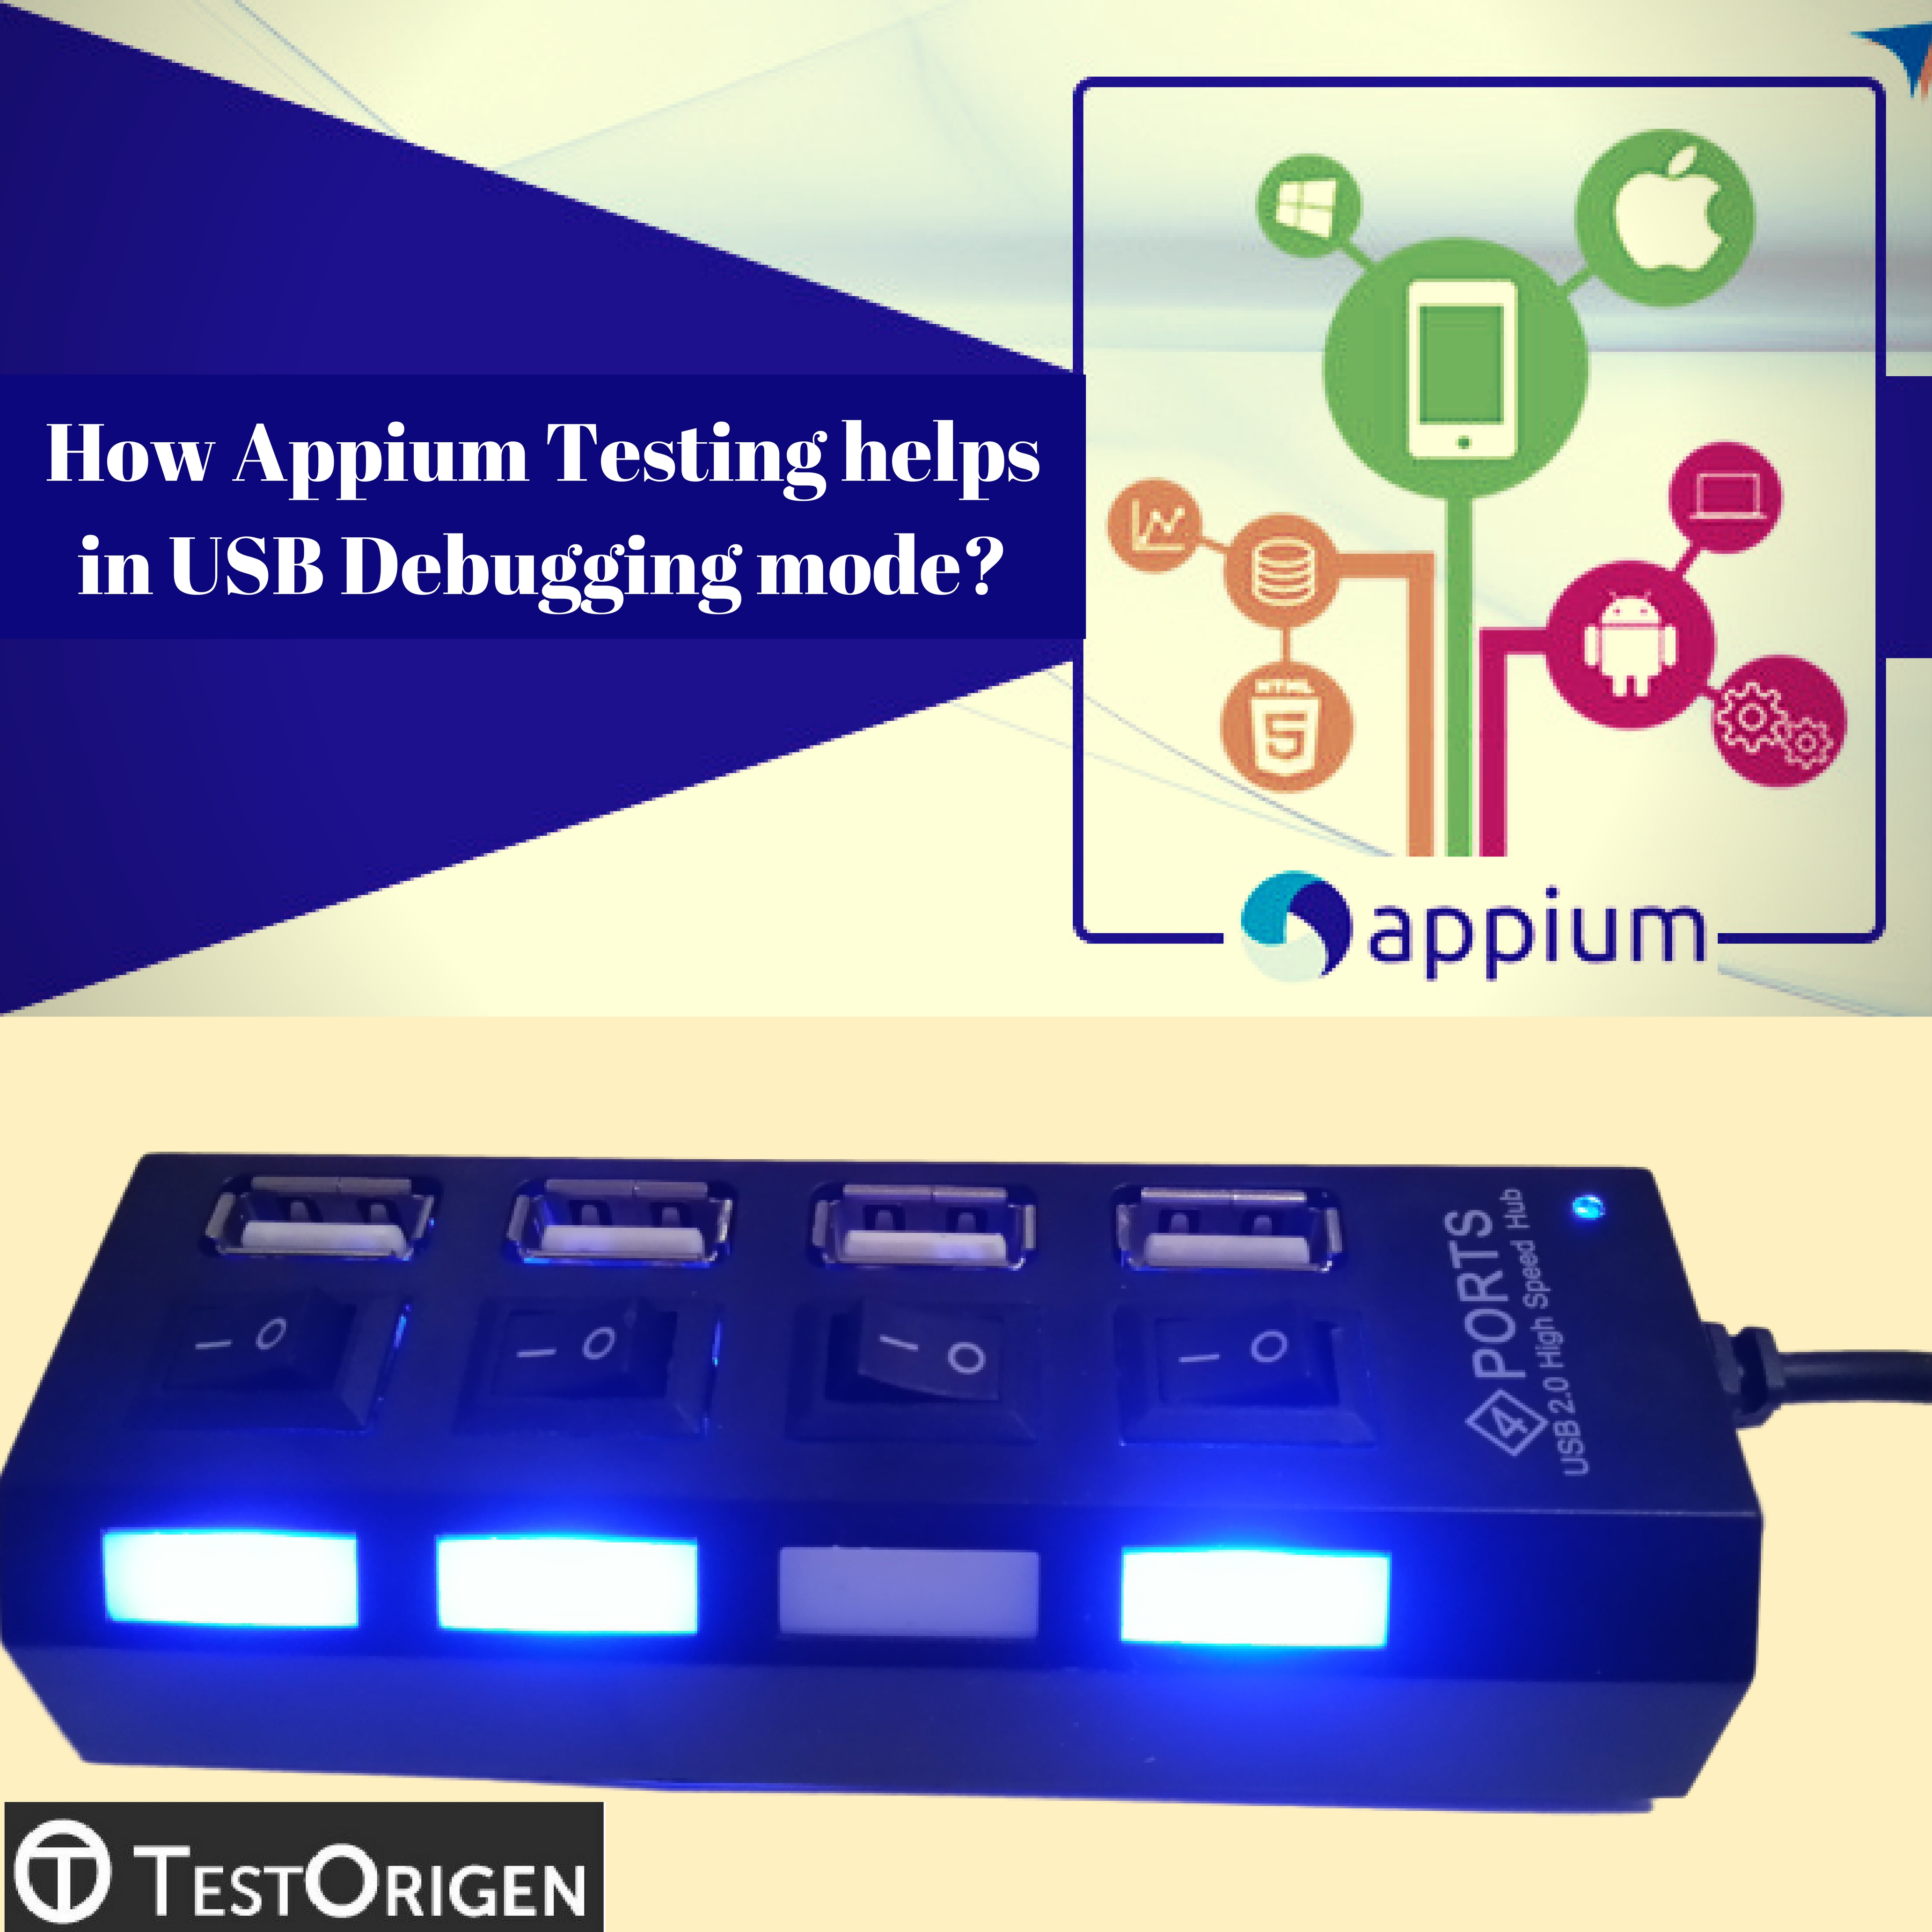 How Appium Testing helps in USB Debugging mode?